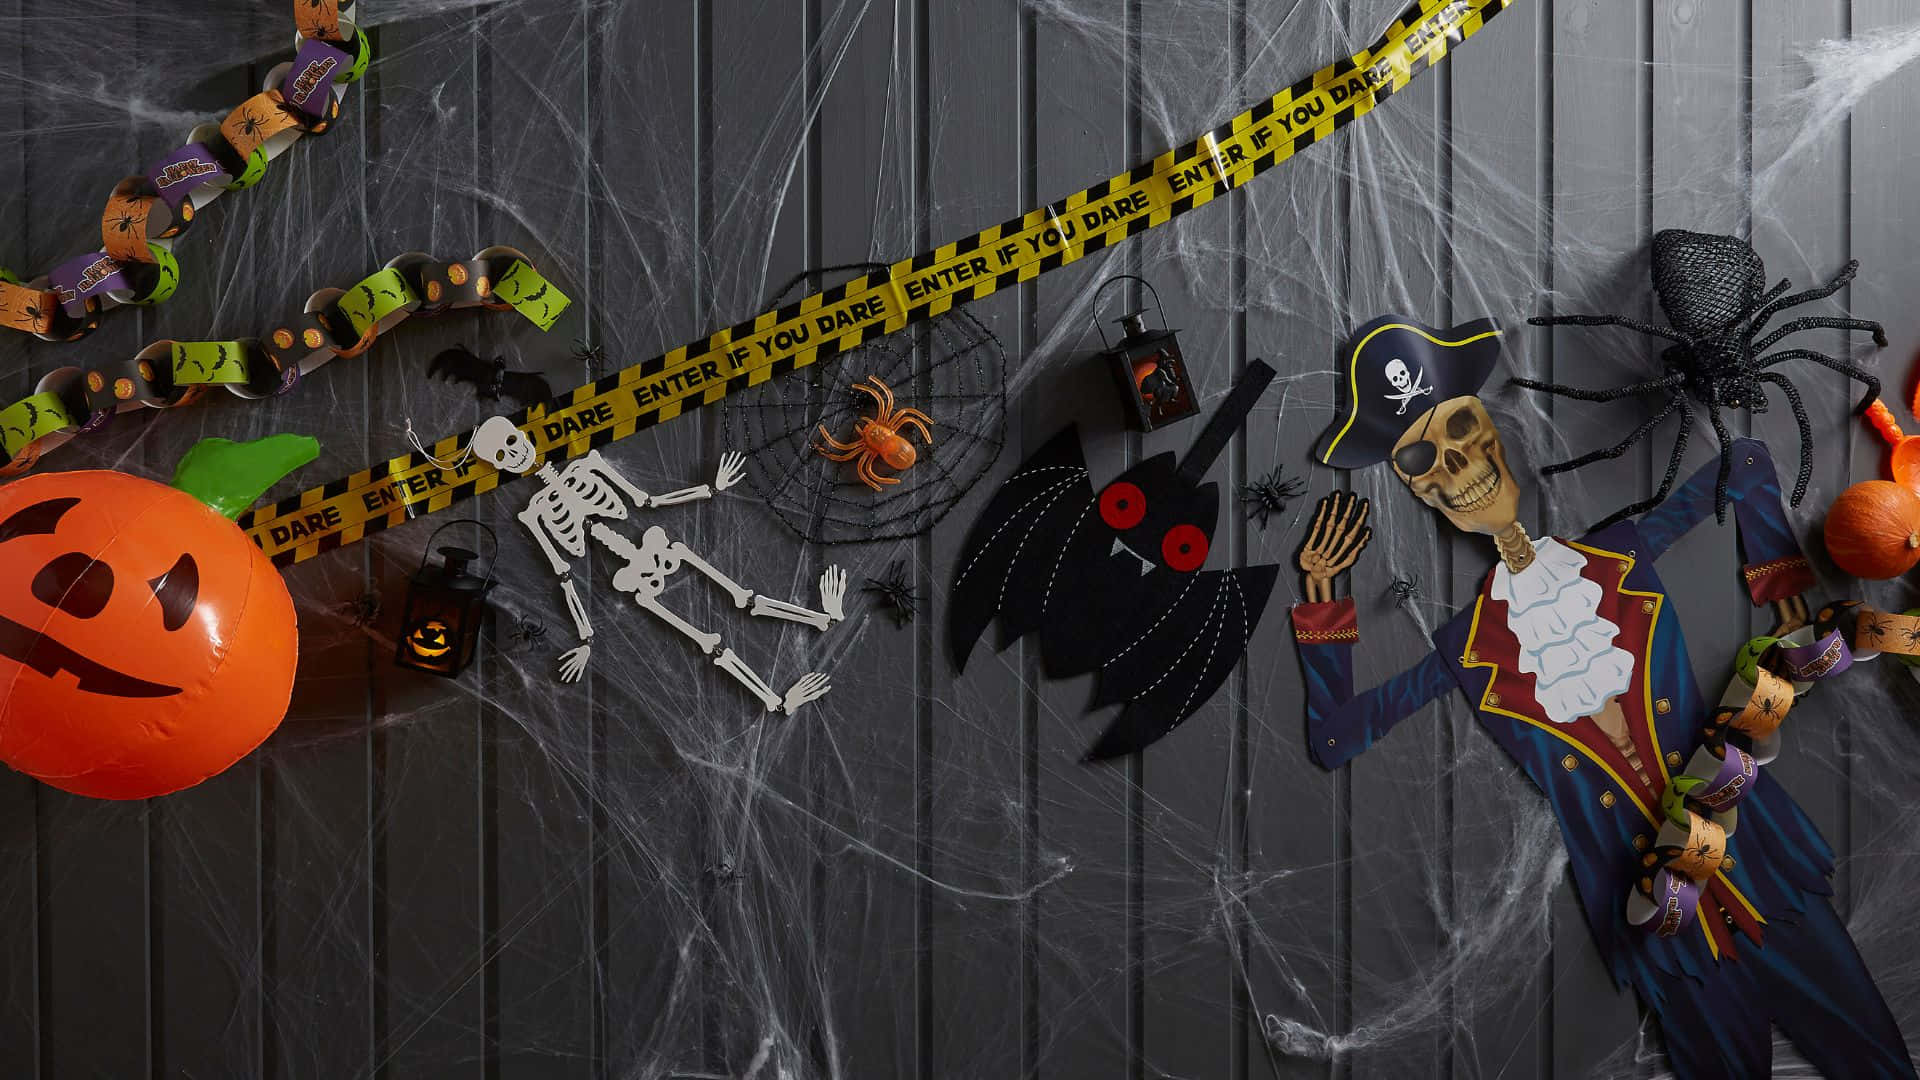 Get crafty this Halloween with these fun and spooky craft ideas Wallpaper